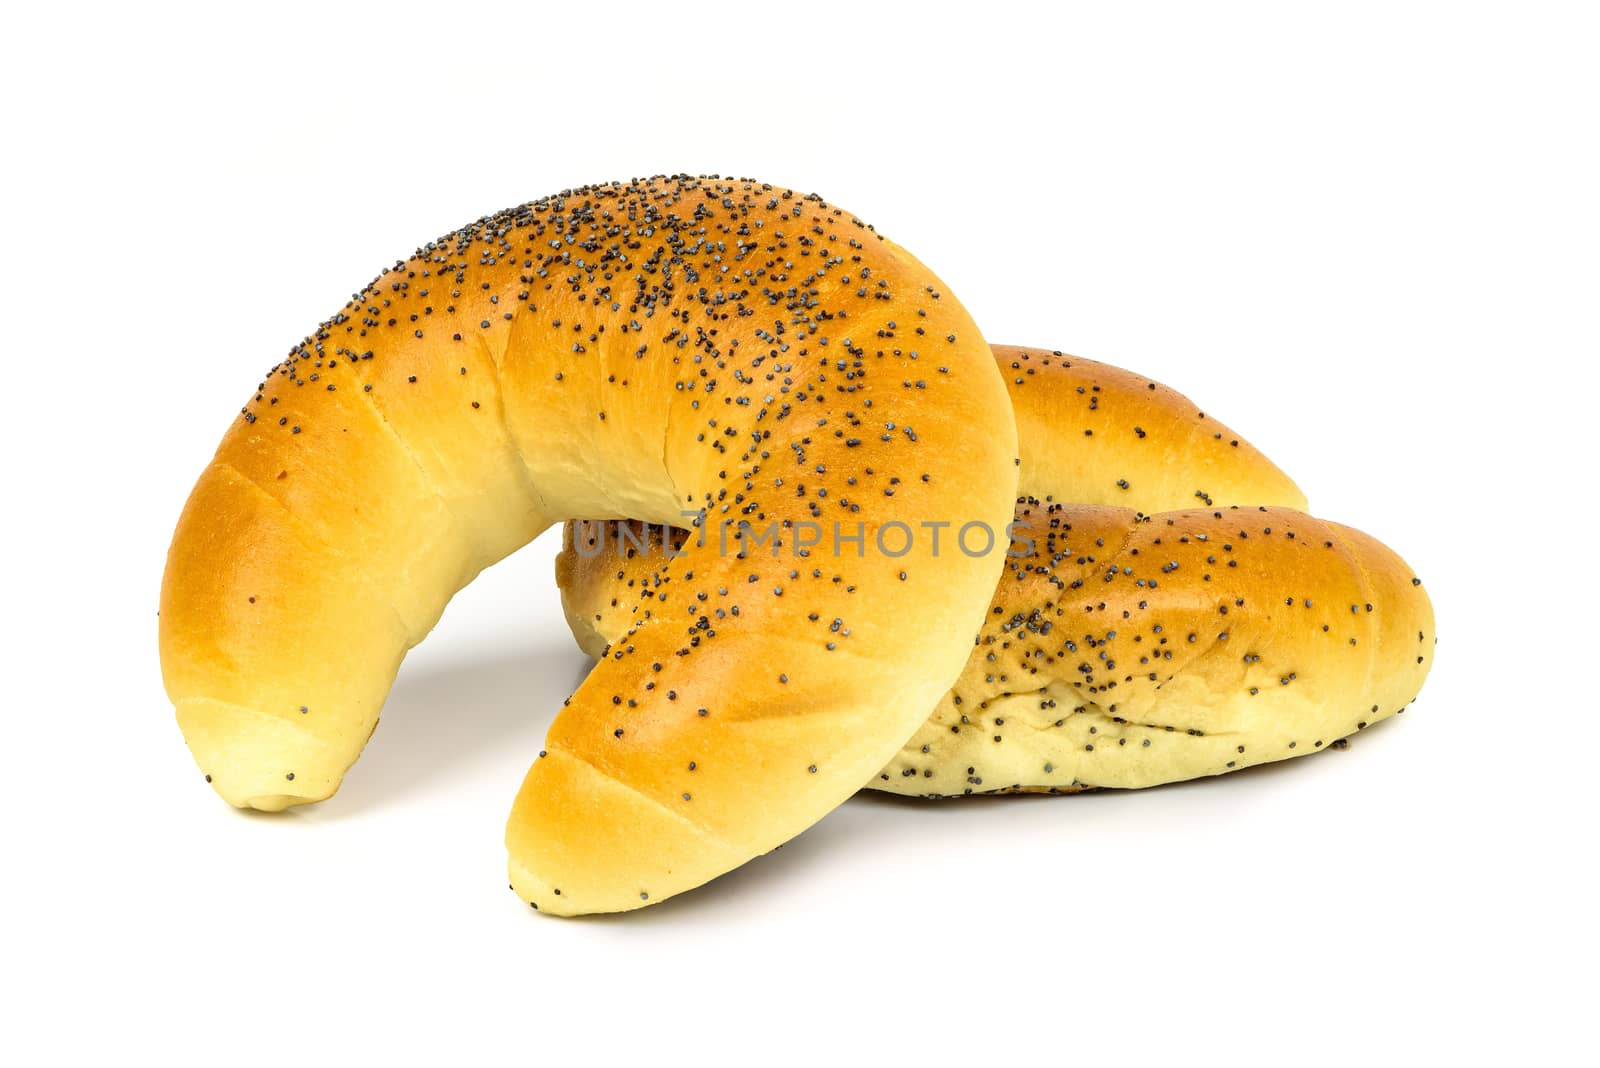 Crescent rolls with poppy seeds isolated on white background with clipping path